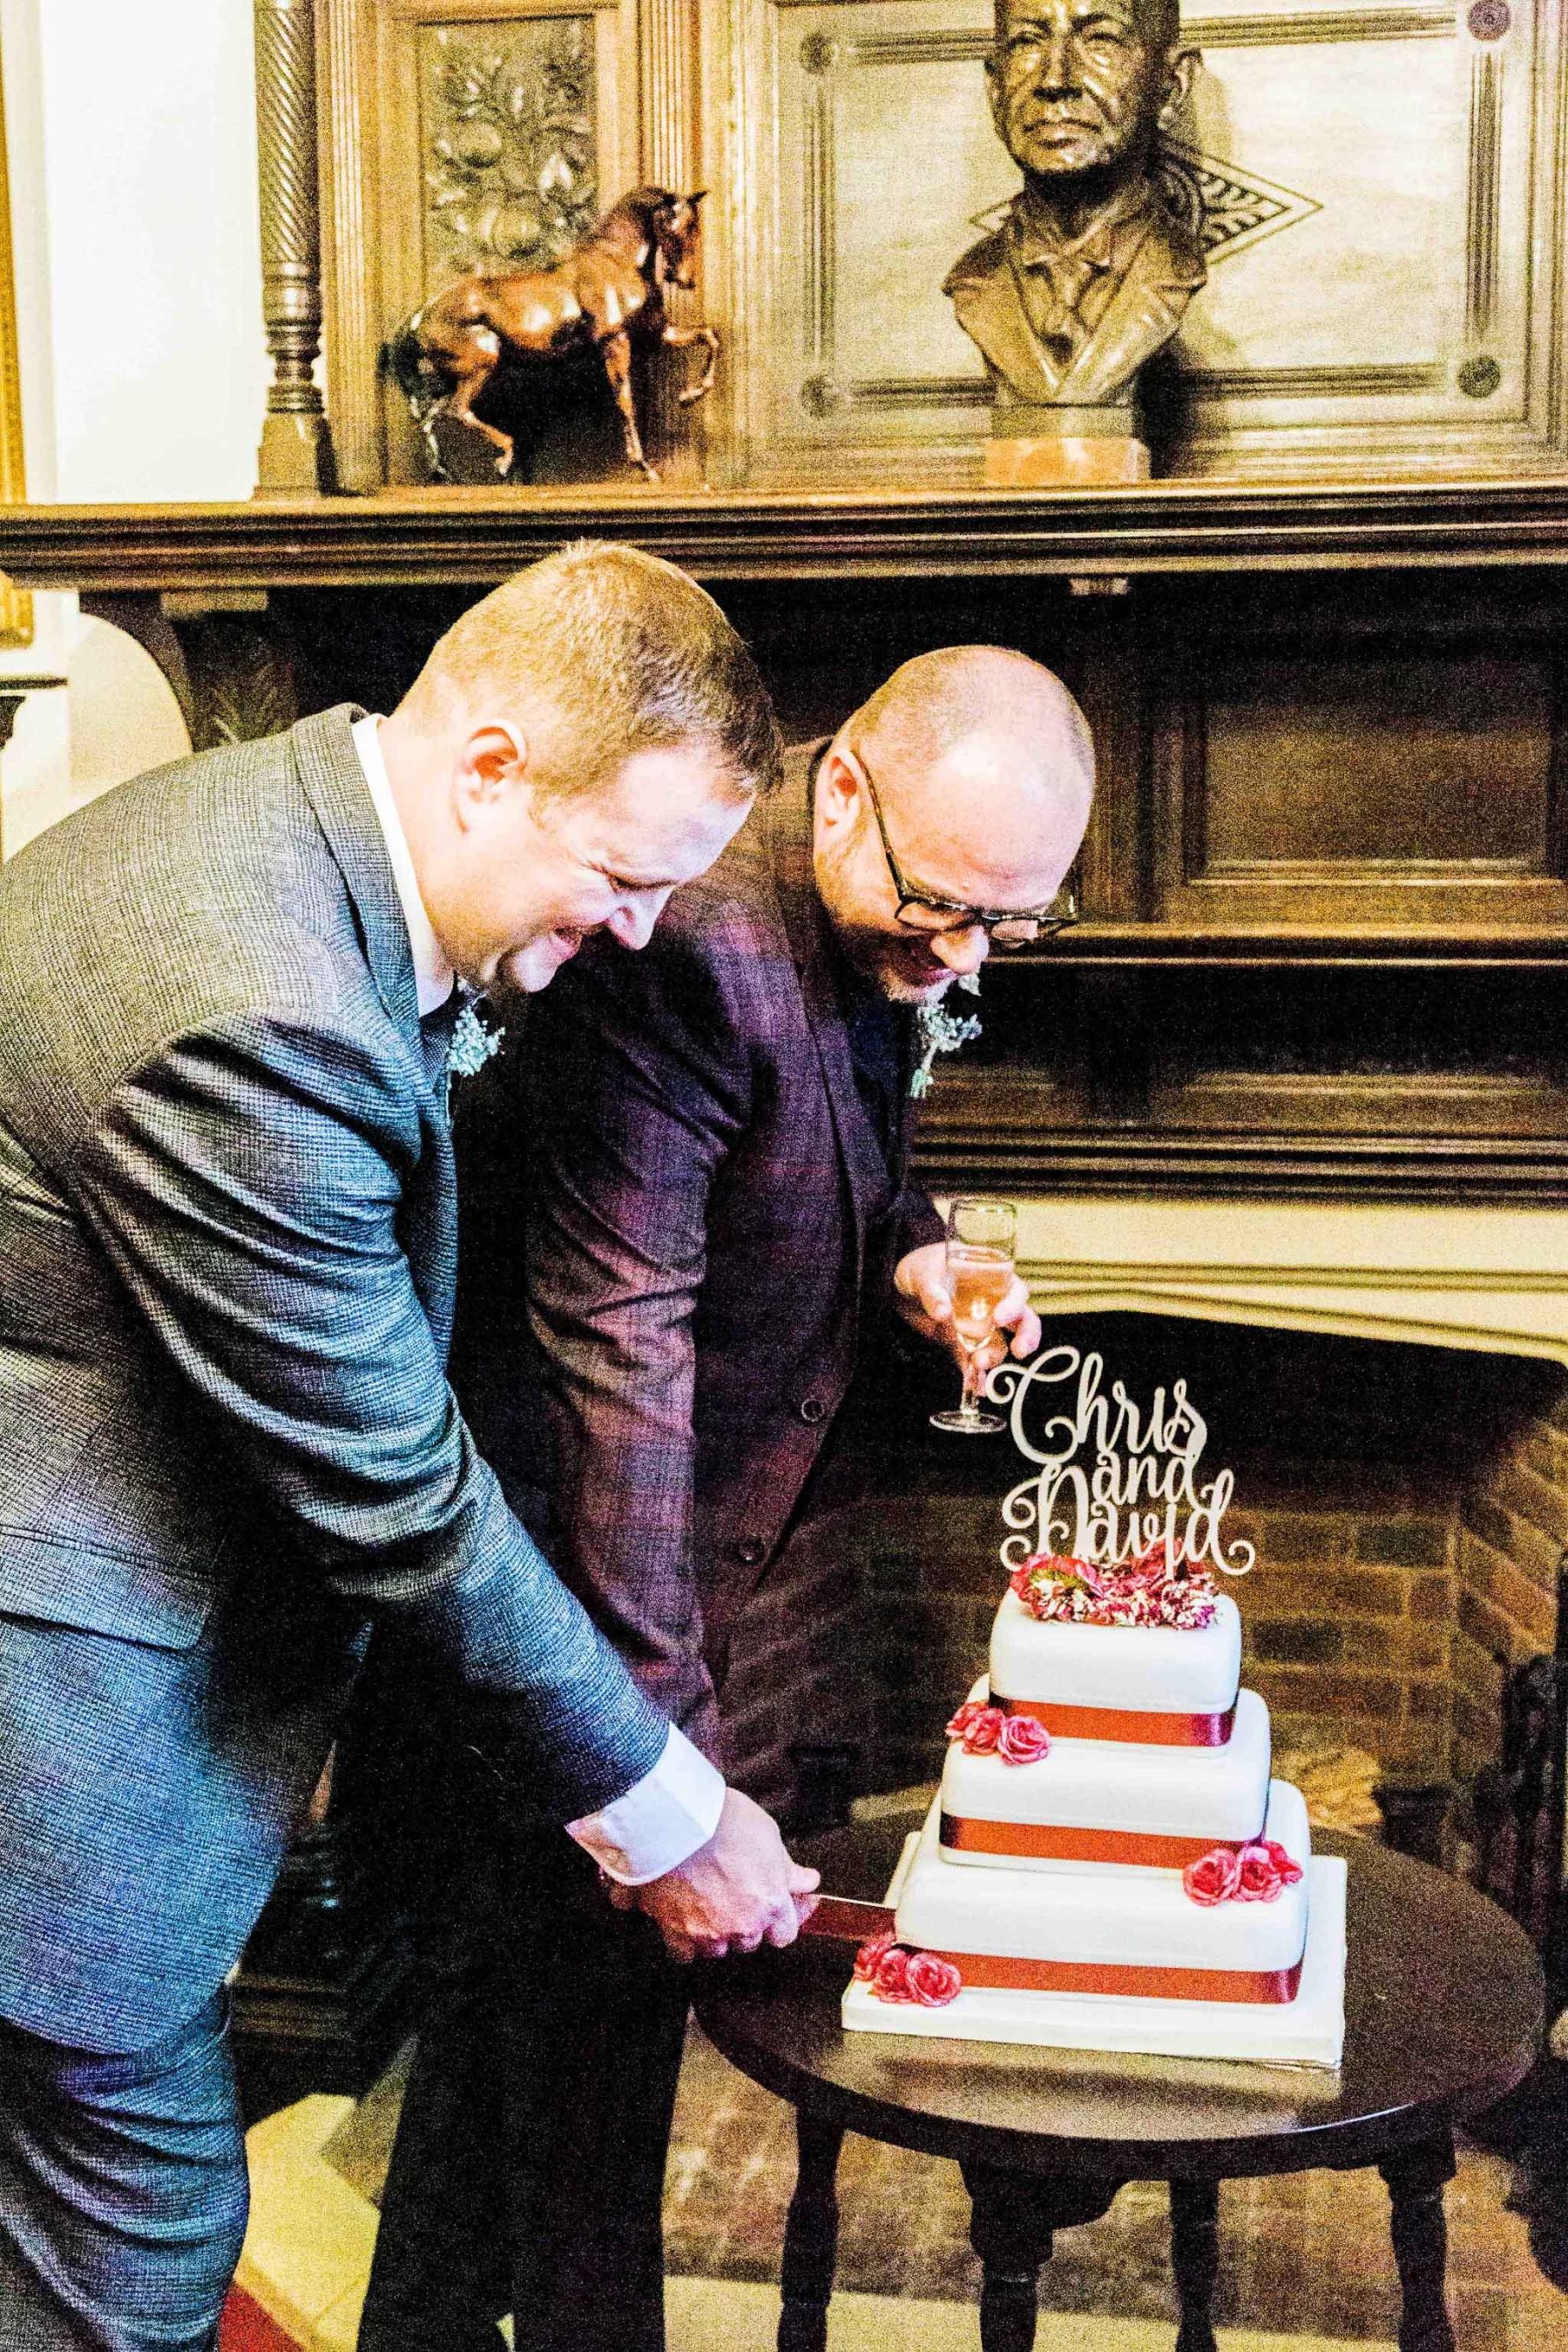 A couple wearing a maroon suit and a grey suit cutting their wedding cake together